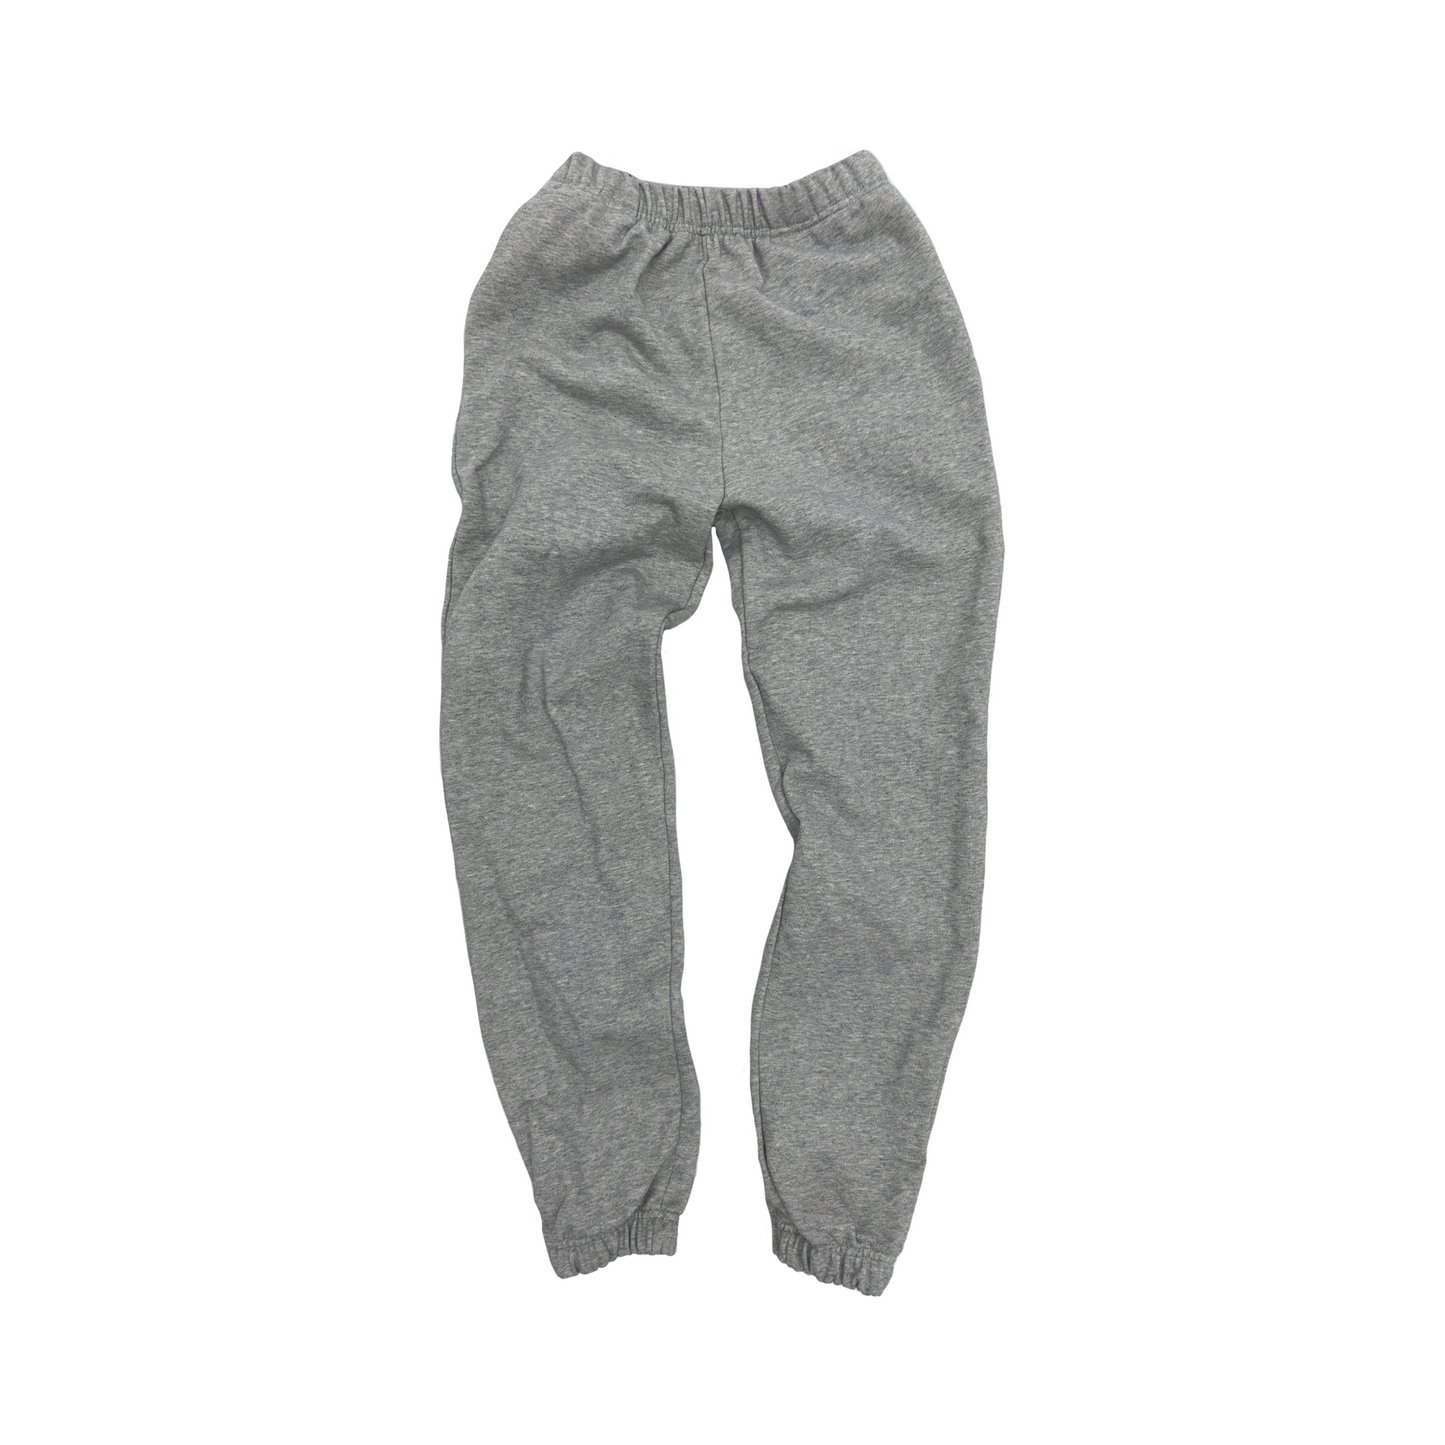 500 GSM 'Heather Grey' French Terry Cotton Sweatpants